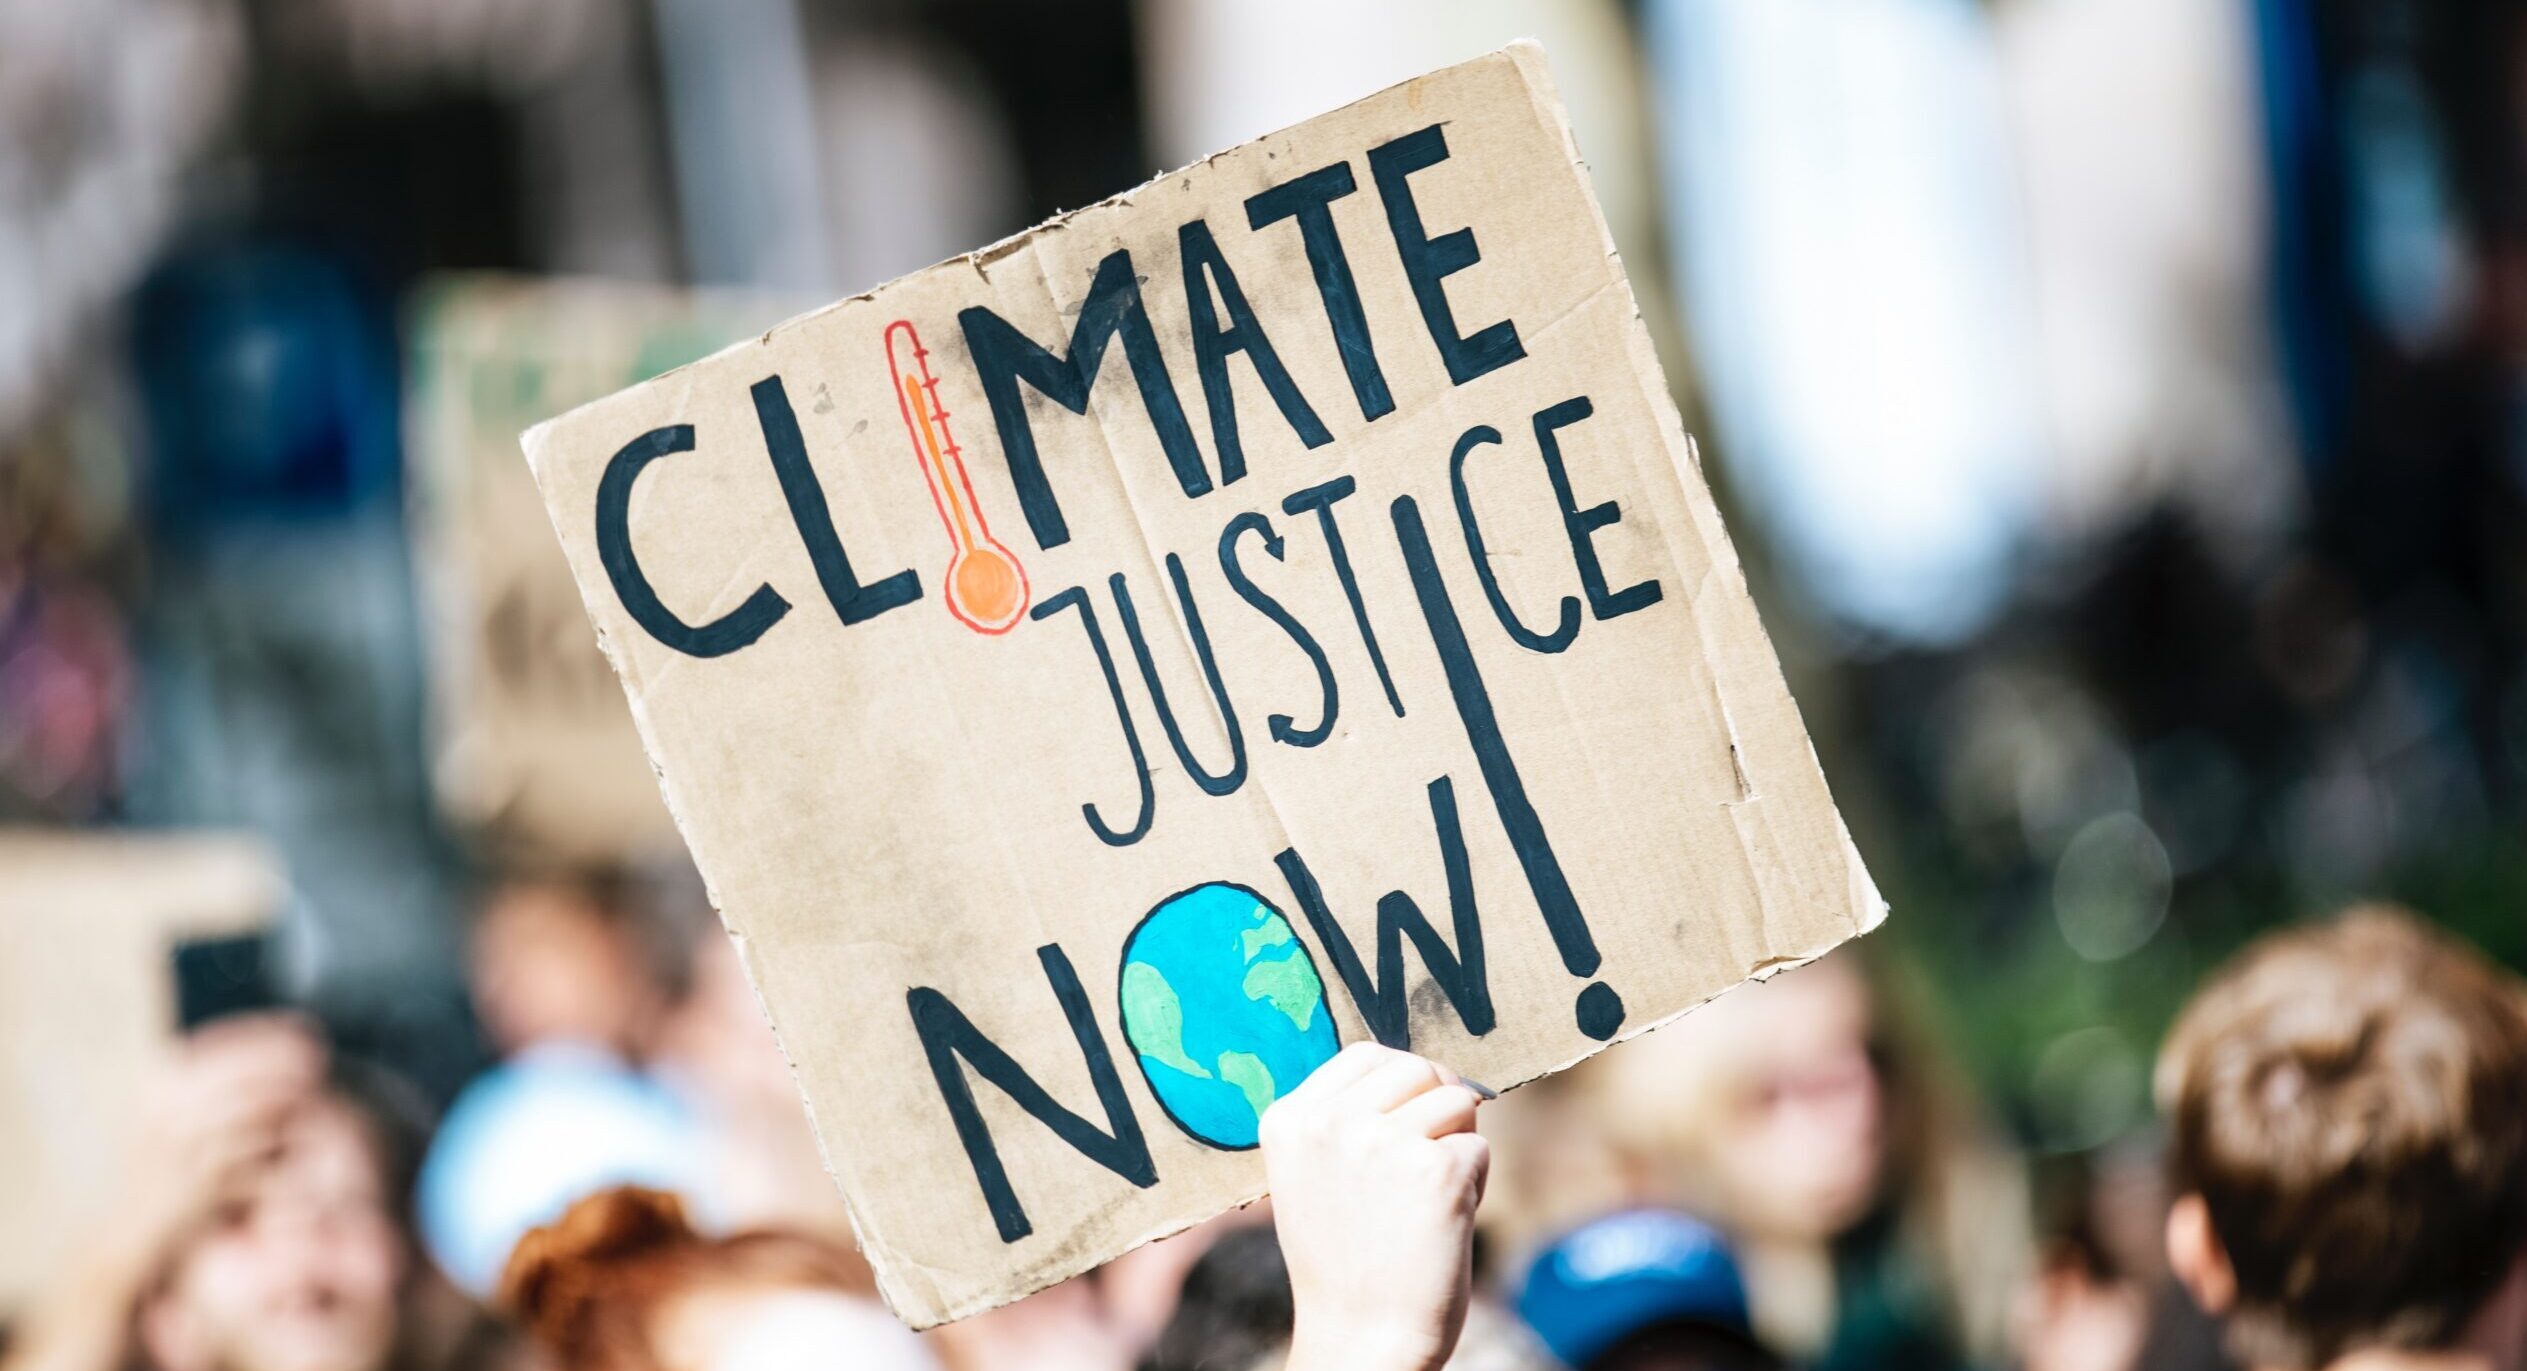 thesis on climate justice